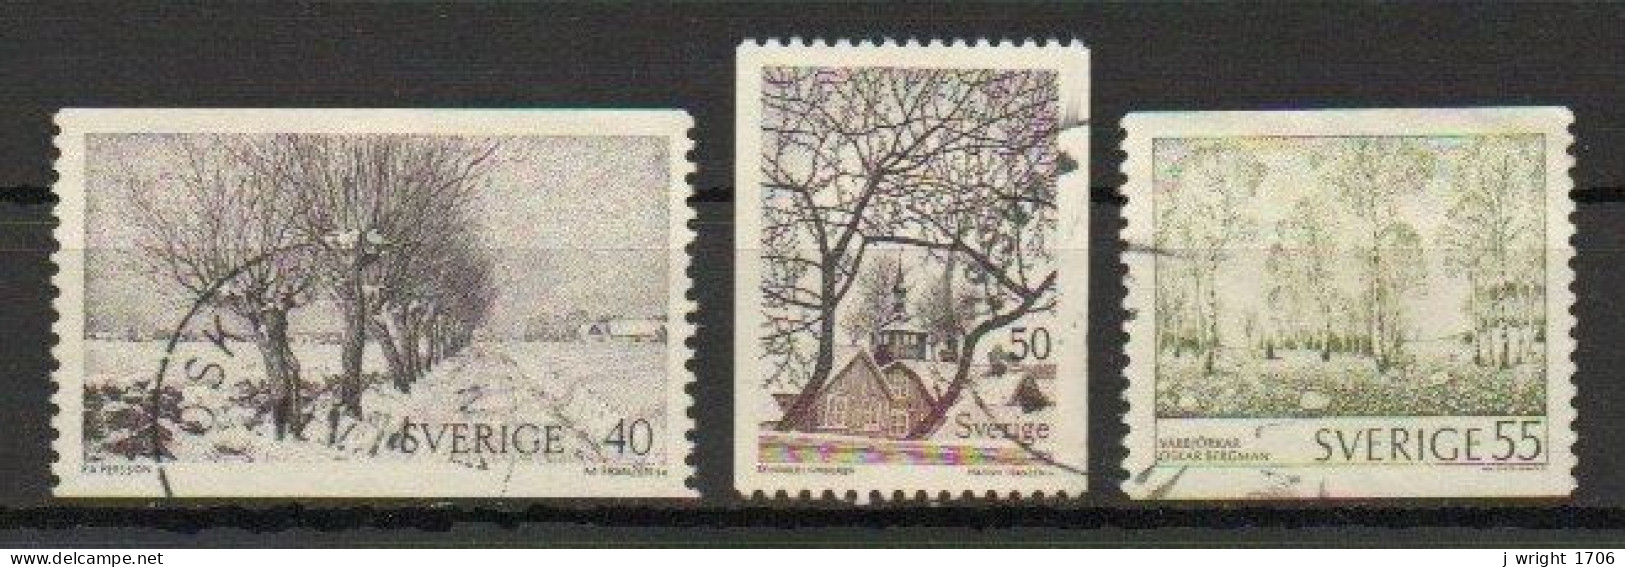 Sweden, 1973, Nature, Set, USED - Used Stamps